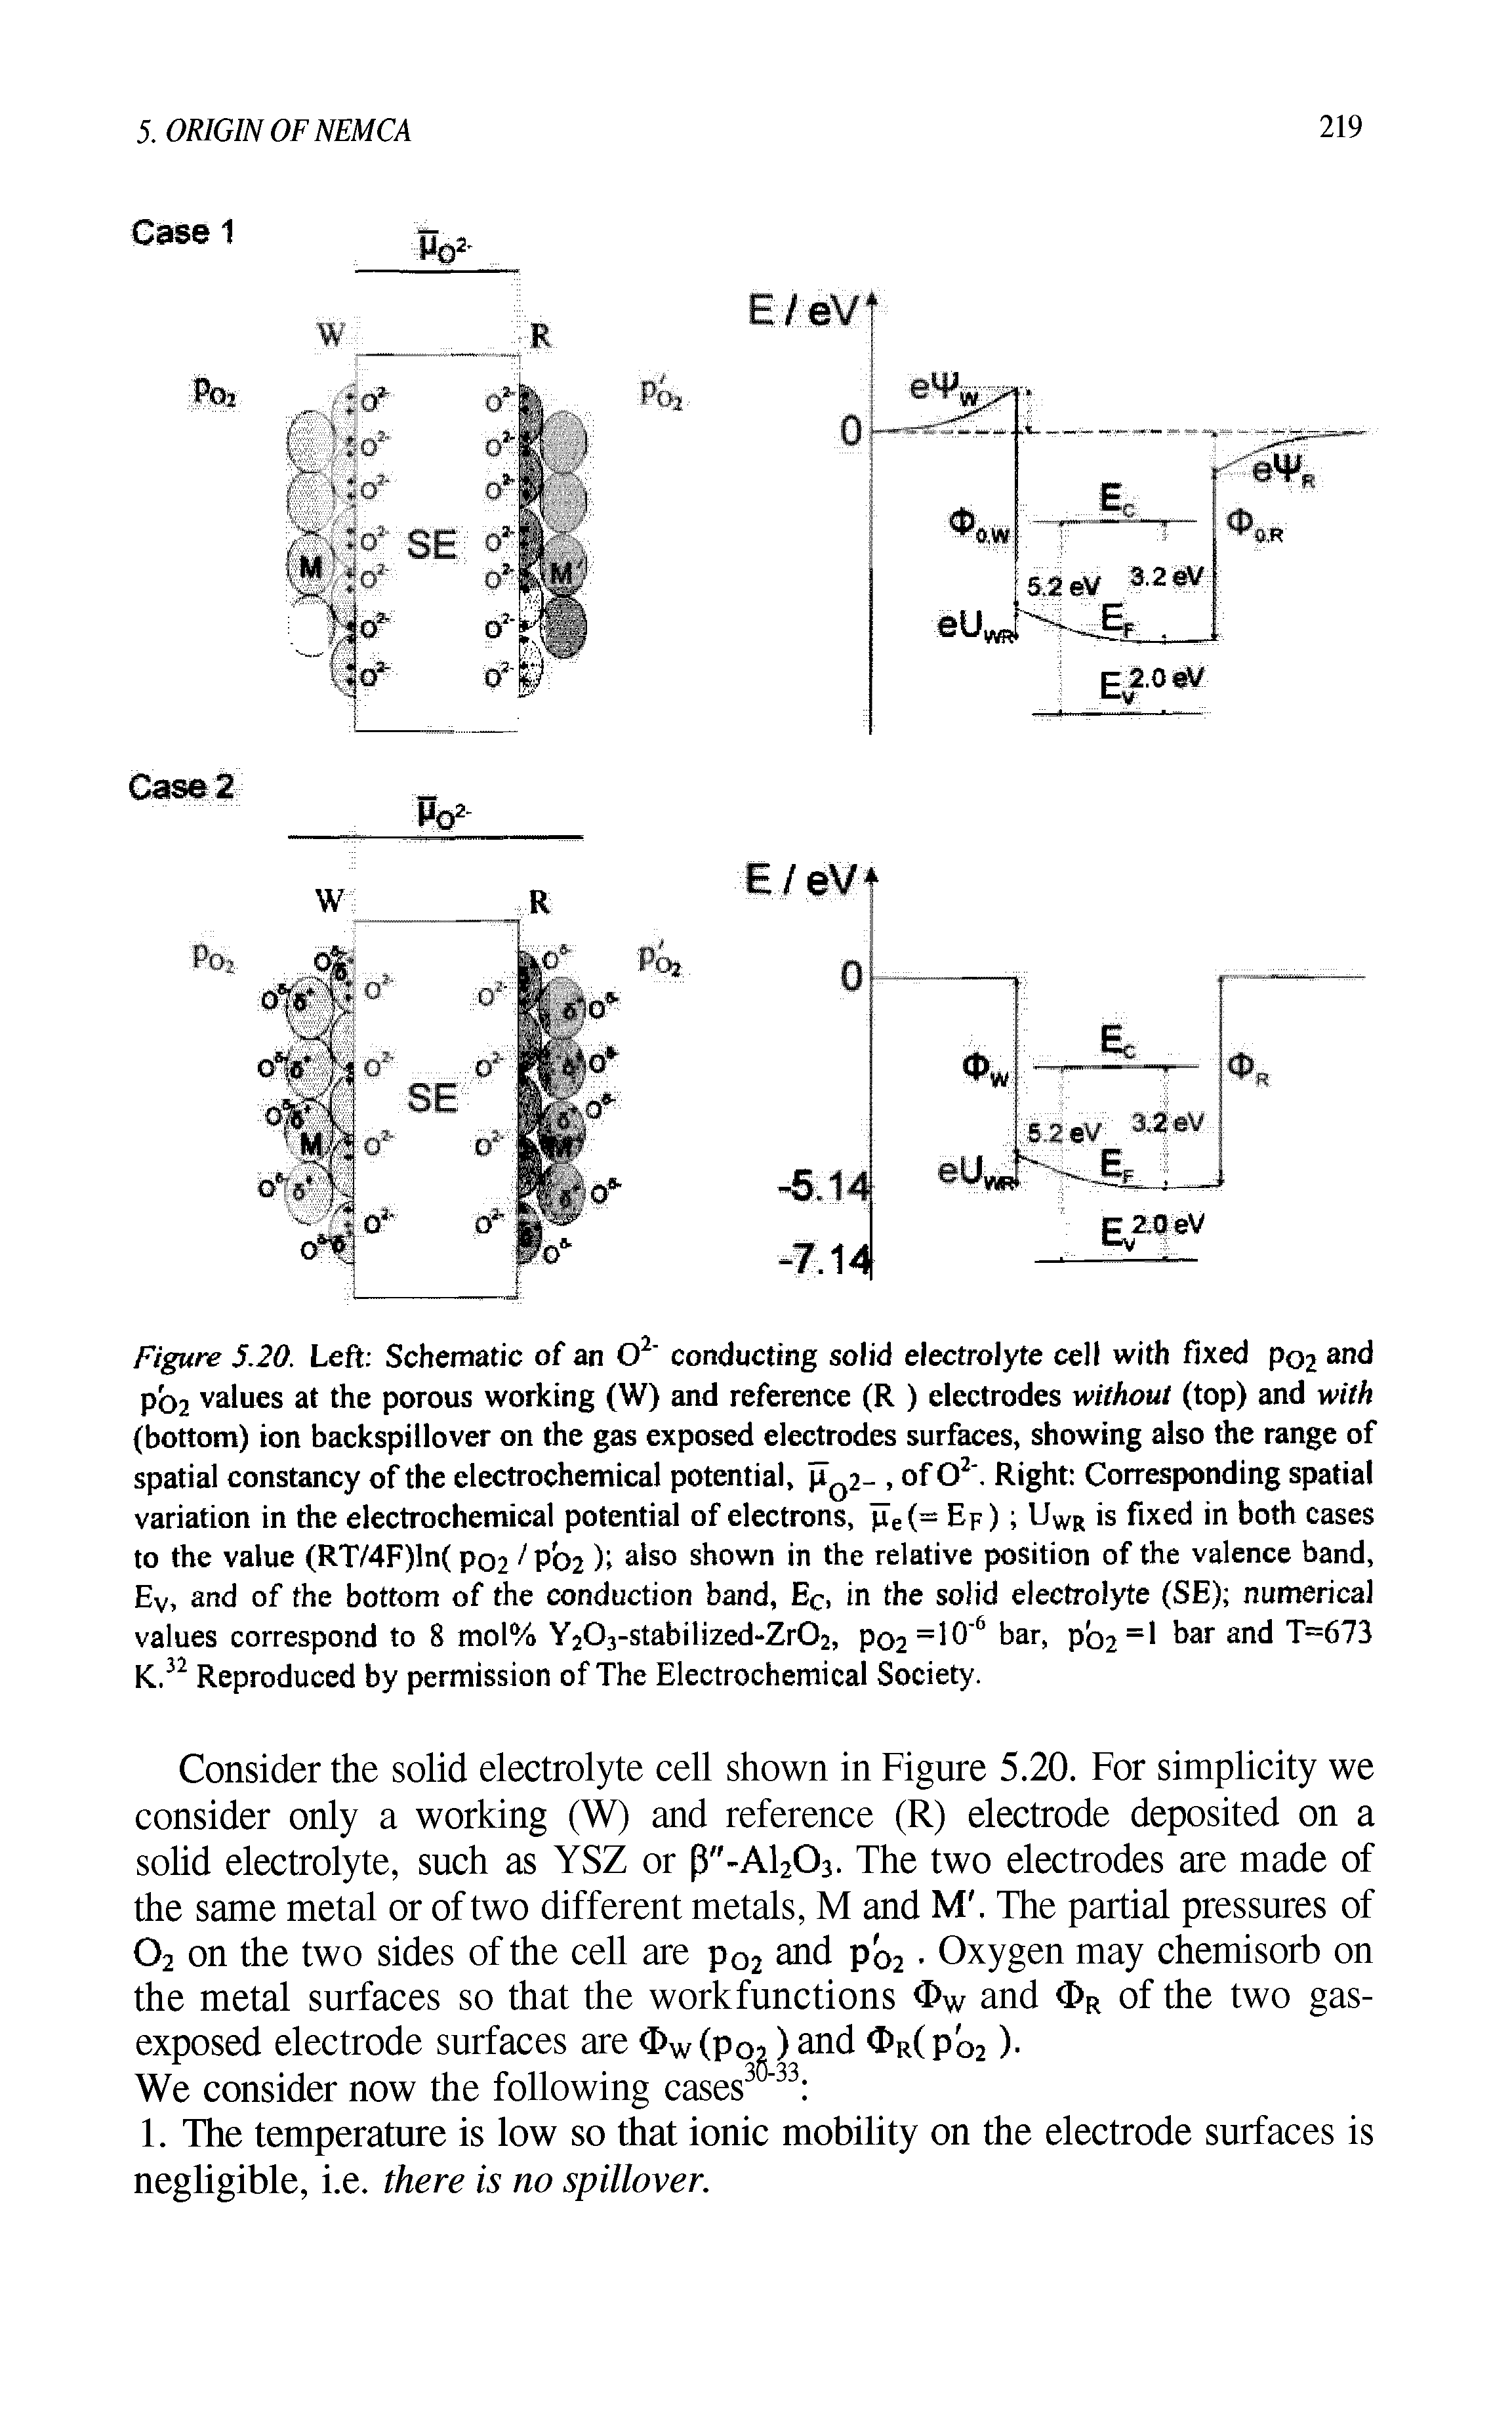 Figure 5.20. Left Schematic of an O2 conducting solid electrolyte cell with fixed P02 and PO2 values at the porous working (W) and reference (R ) electrodes without (top) and with (bottom) ion backspillover on the gas exposed electrodes surfaces, showing also the range of spatial constancy of the electrochemical potential, PQ2-, of O2. Right Corresponding spatial variation in the electrochemical potential of electrons, ]Ie(= Ef) UWR is fixed in both cases to the value (RT/4F)ln( P02 /pc>2 ) also shown in the relative position of the valence band, Ev, and of the bottom of the conduction band, Ec, in the solid electrolyte (SE) numerical values correspond to 8 mol% Y203-stabilized-Zr02, pc>2=10 6 bar, po2=l bar and T=673 K.32 Reproduced by permission of The Electrochemical Society.